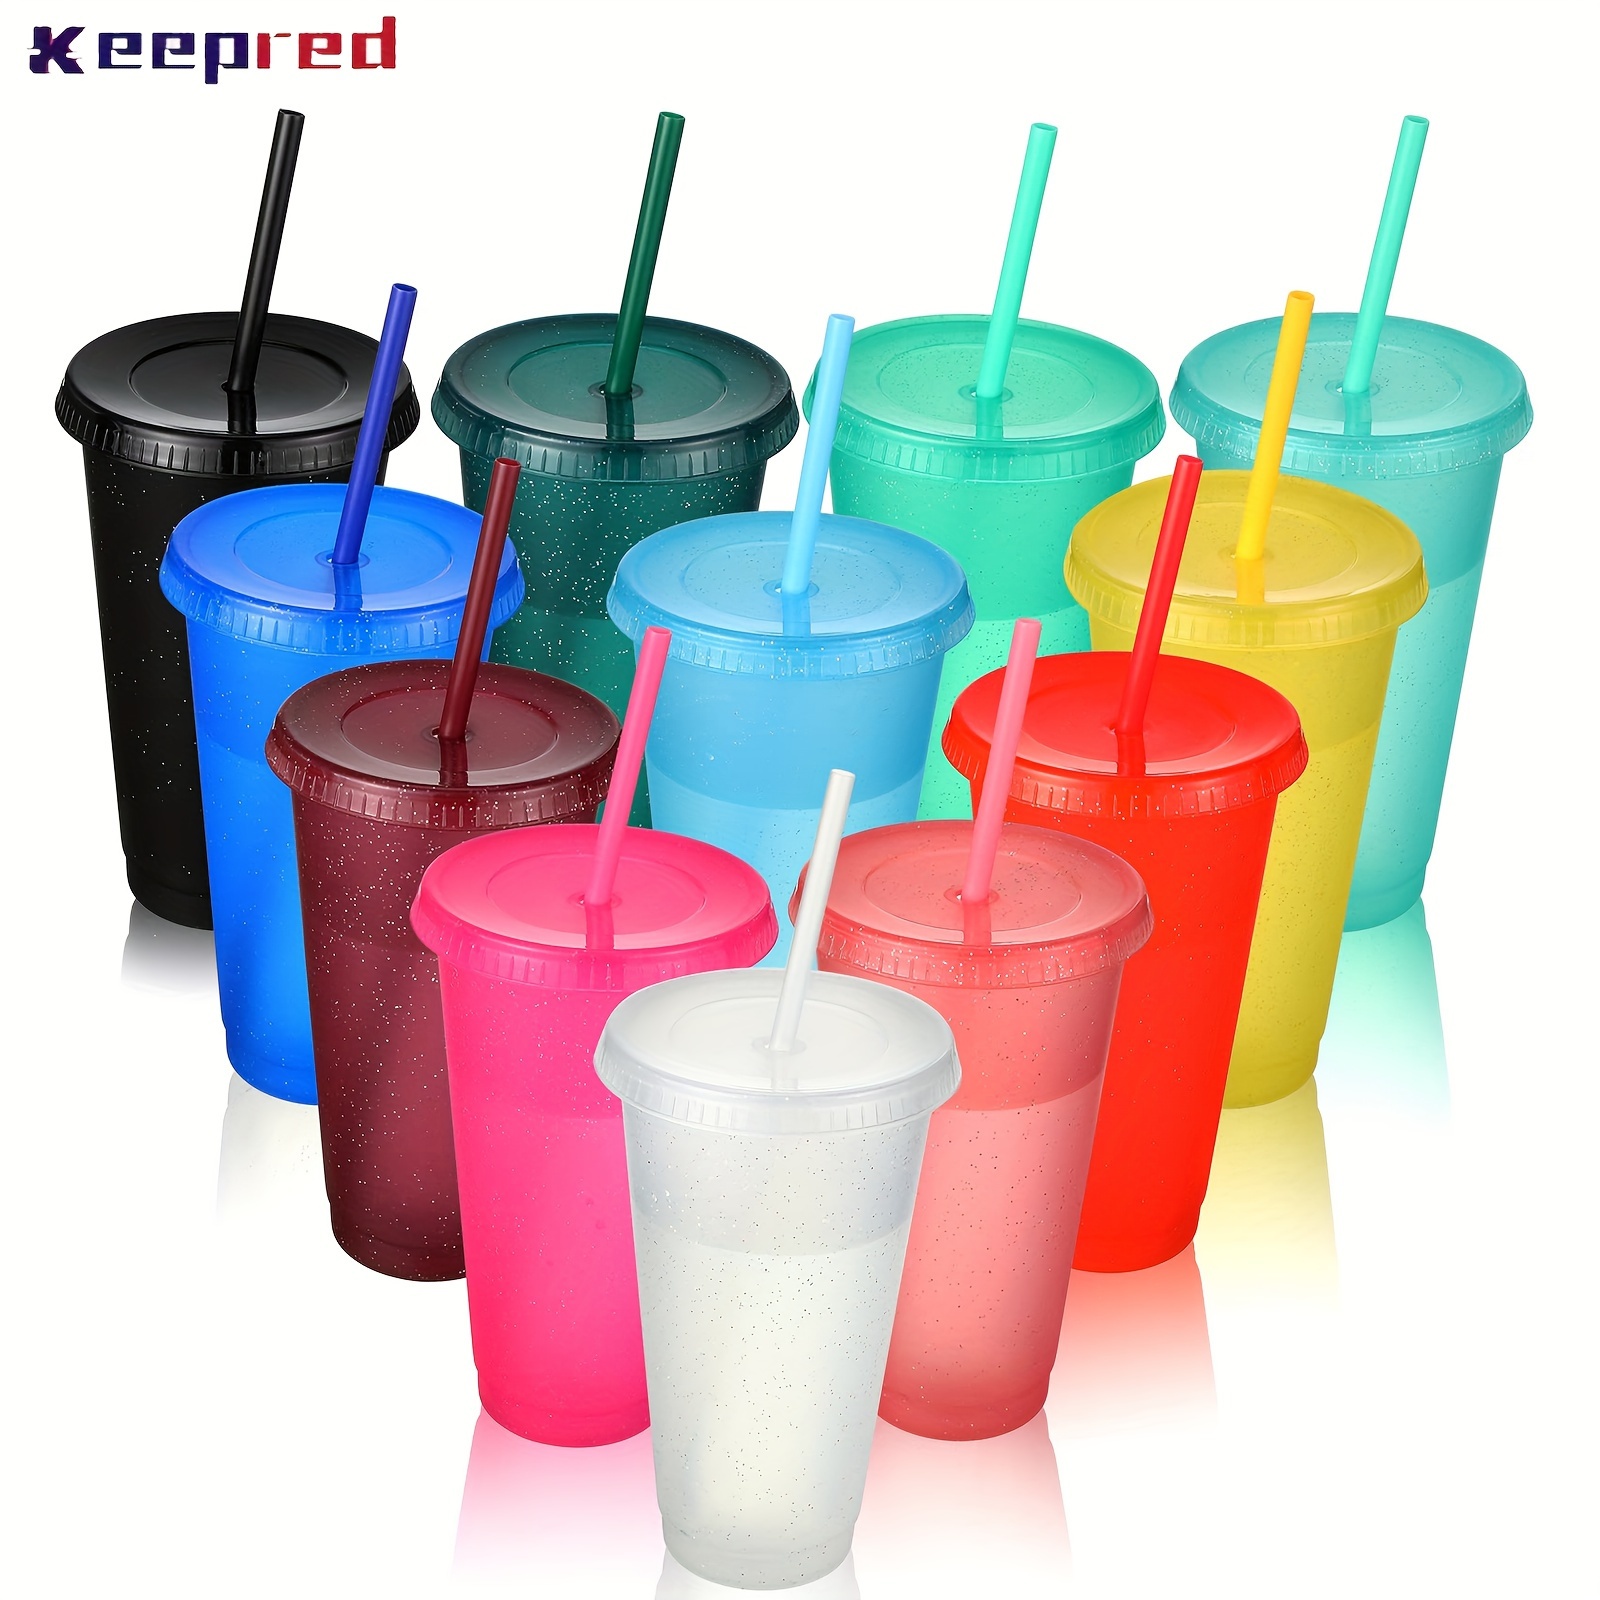 

12-pack Keepred 24oz Tumblers With Lids And Straws, Reusable Plastic Drinking Cups, Iced Coffee Travel Mugs, Assorted Colors, Bpa-free, For Parties, Birthdays, On-the-go Beverages